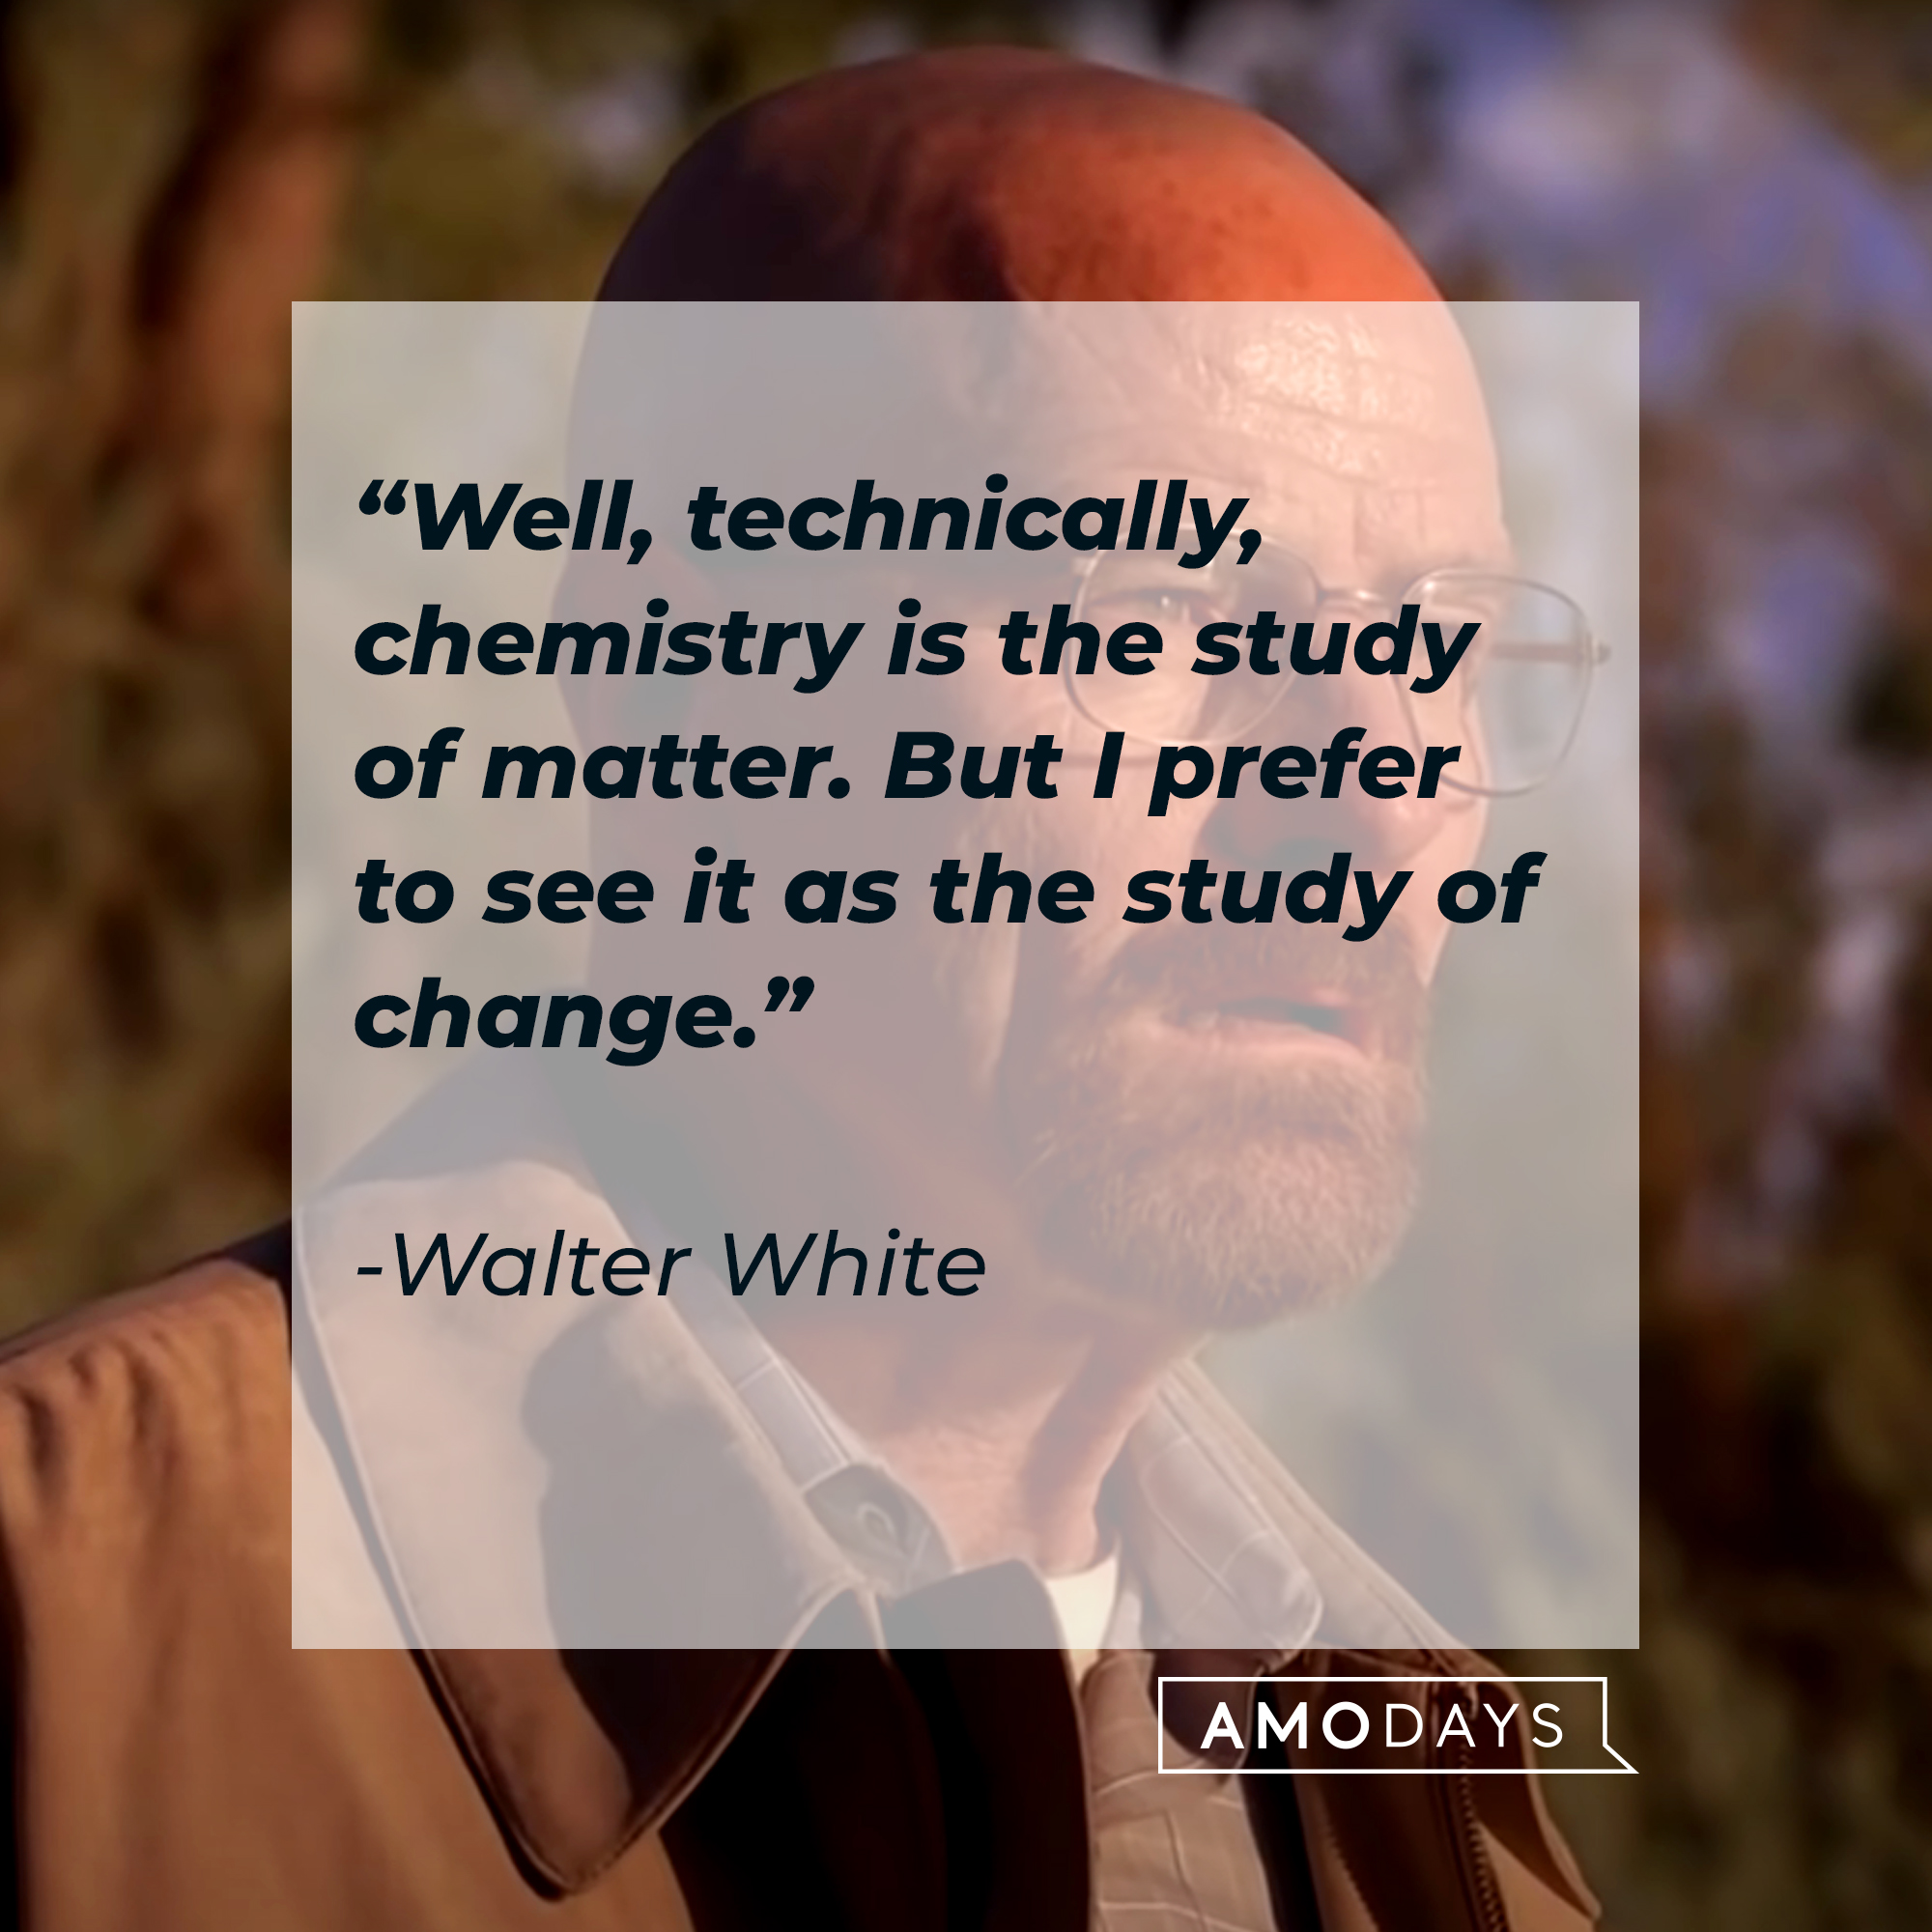 An Image of Walter White, with his quote: “Well, technically, chemistry is the study of matter. But I prefer to see it as the study of change.” | Source: Youtube.com/breakingbad